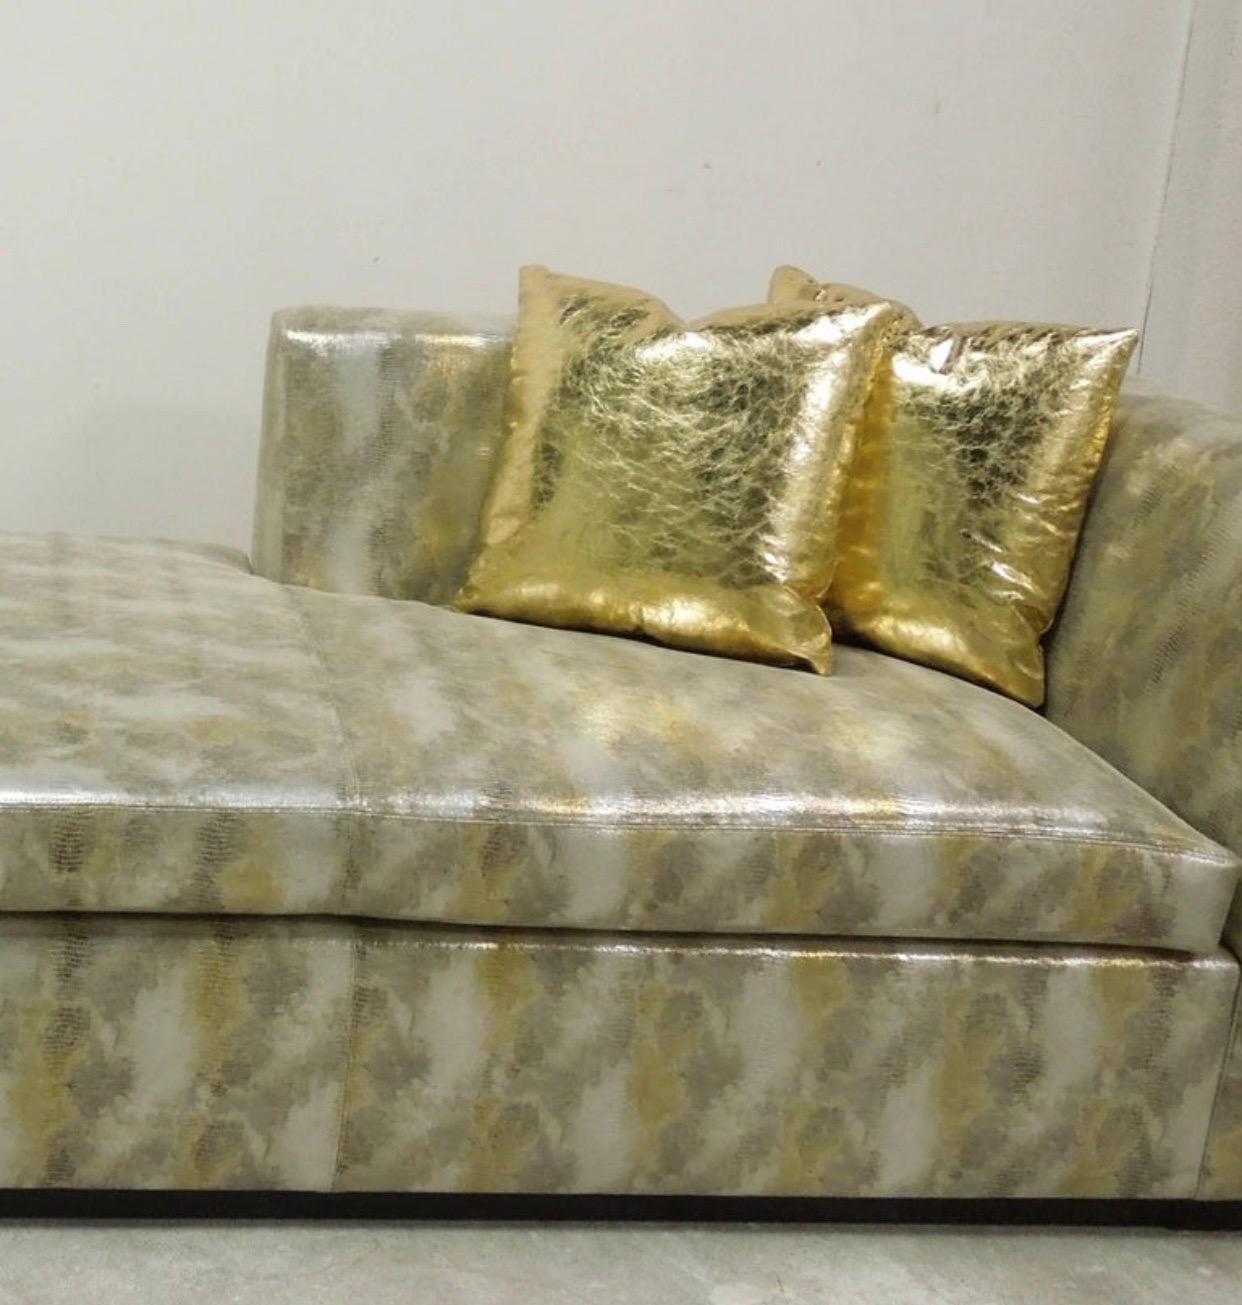 A spectacular, glamorous, high end, piece of one of a kind furniture! Custom made modern sofa made in most expensive designer metallic textured leather in mottled silver, gold and bronze. handmade in Los Angeles Design Factory. Designed with custom